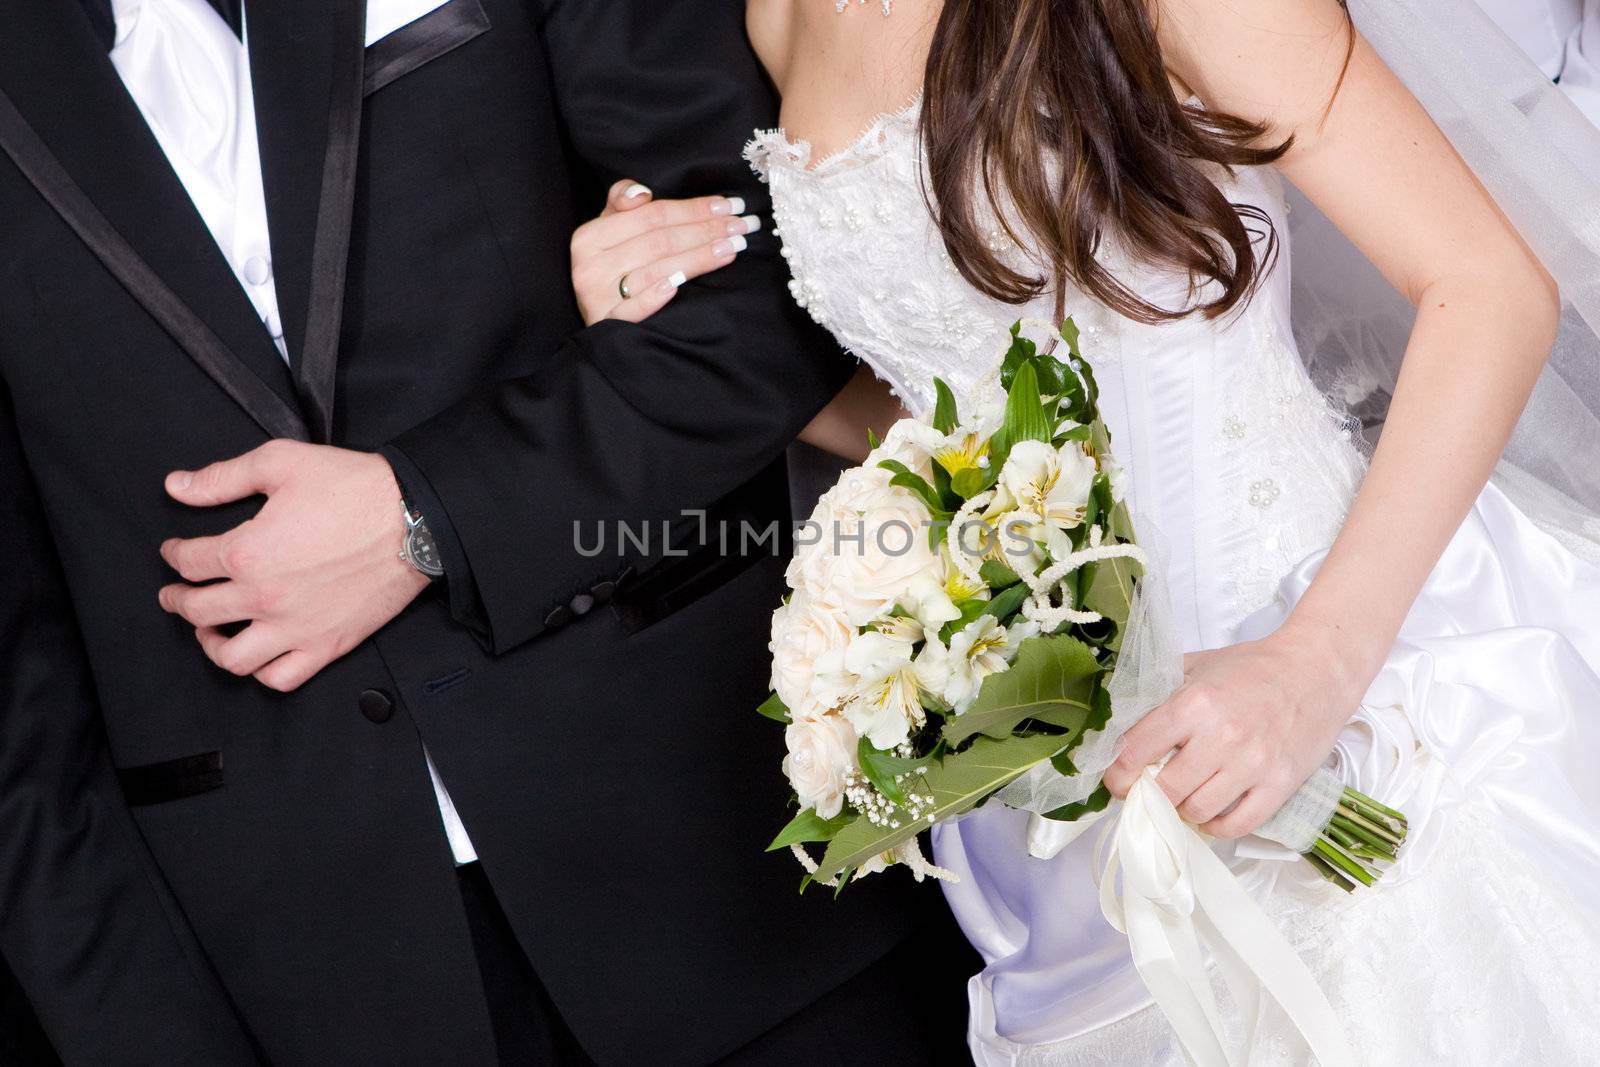 hands of a groom and a bride with a flower bouquet by vsurkov